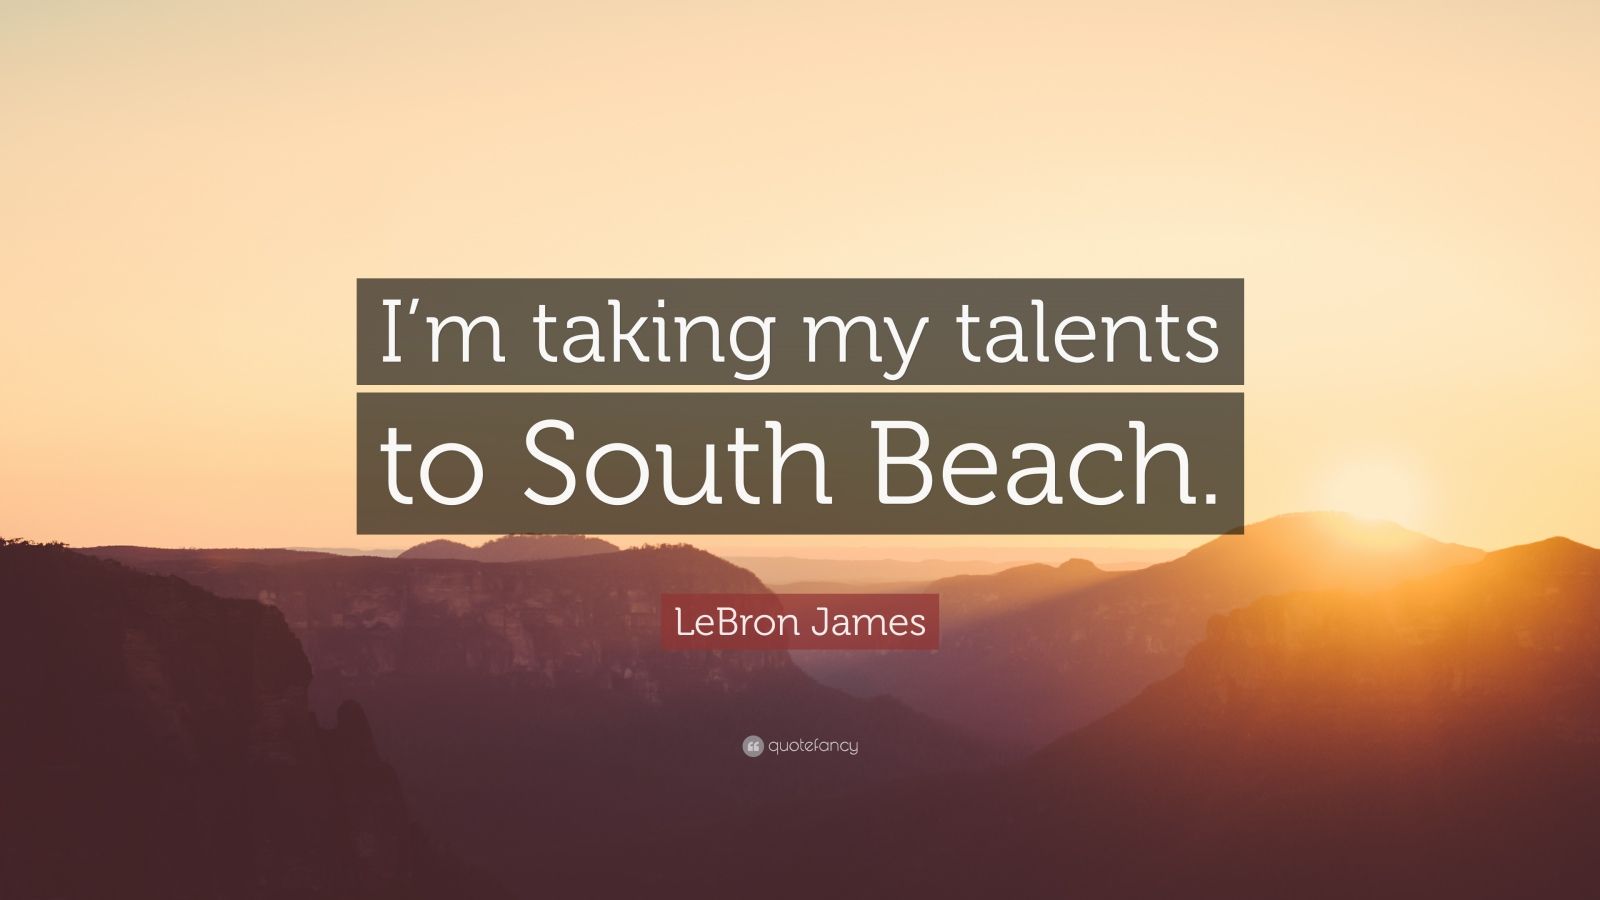 lebron taking my talents to south beach